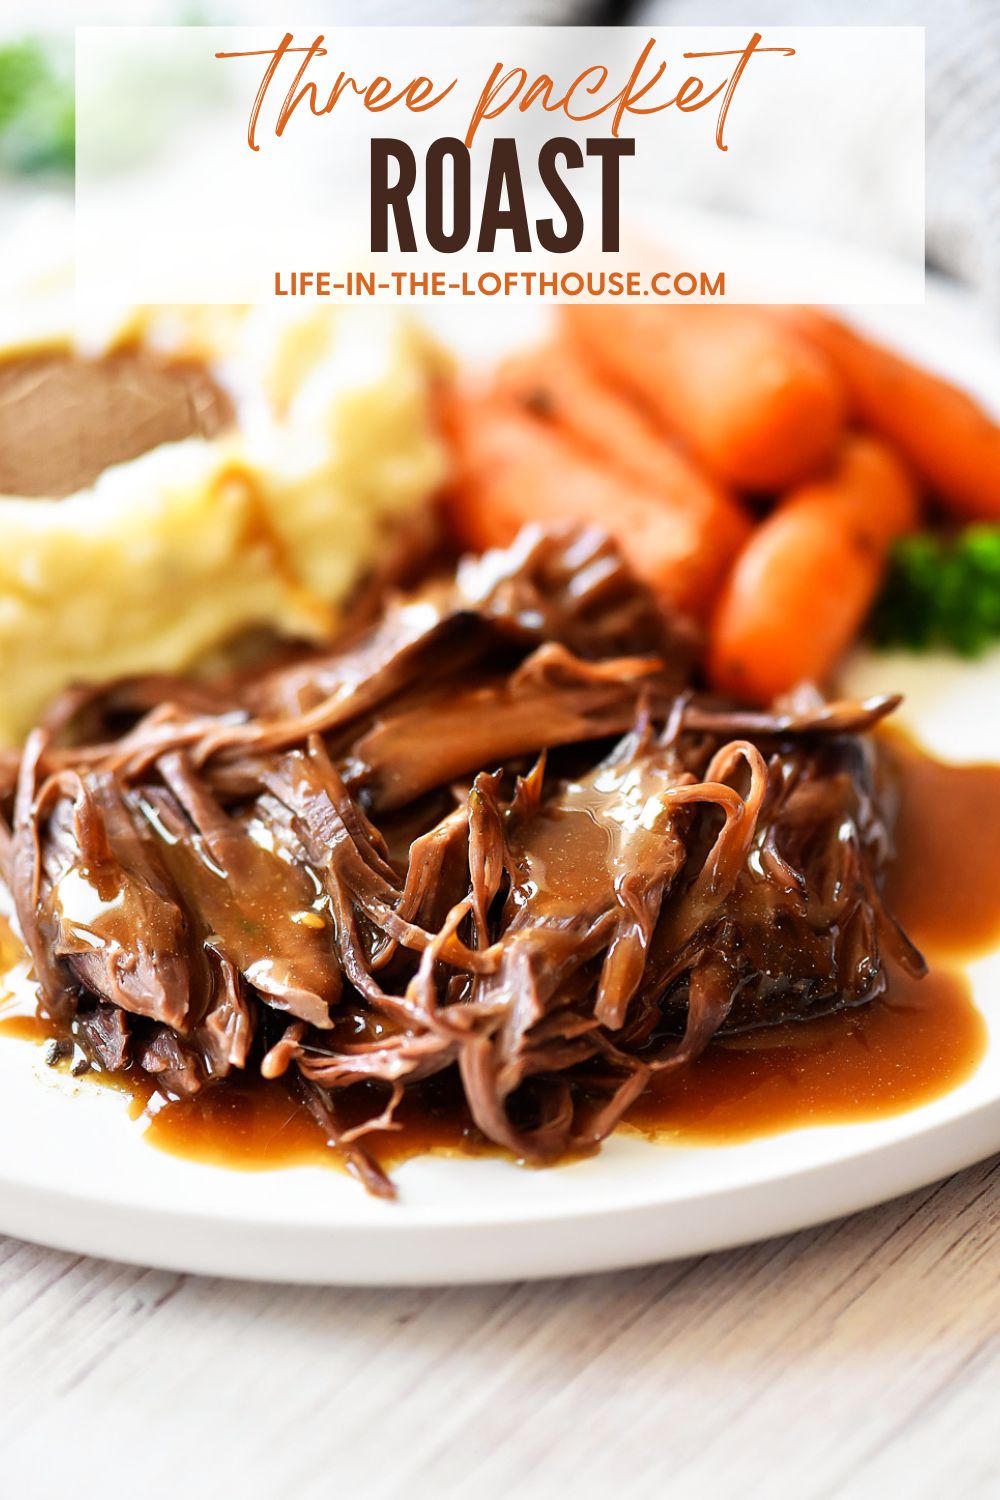 Three Packet Roast is a flavorful slow cooked roast that only requires a packet of Brown gravy mix, Italian Seasoning and Ranch dressing mix. Life-in-the-Lofthouse.com